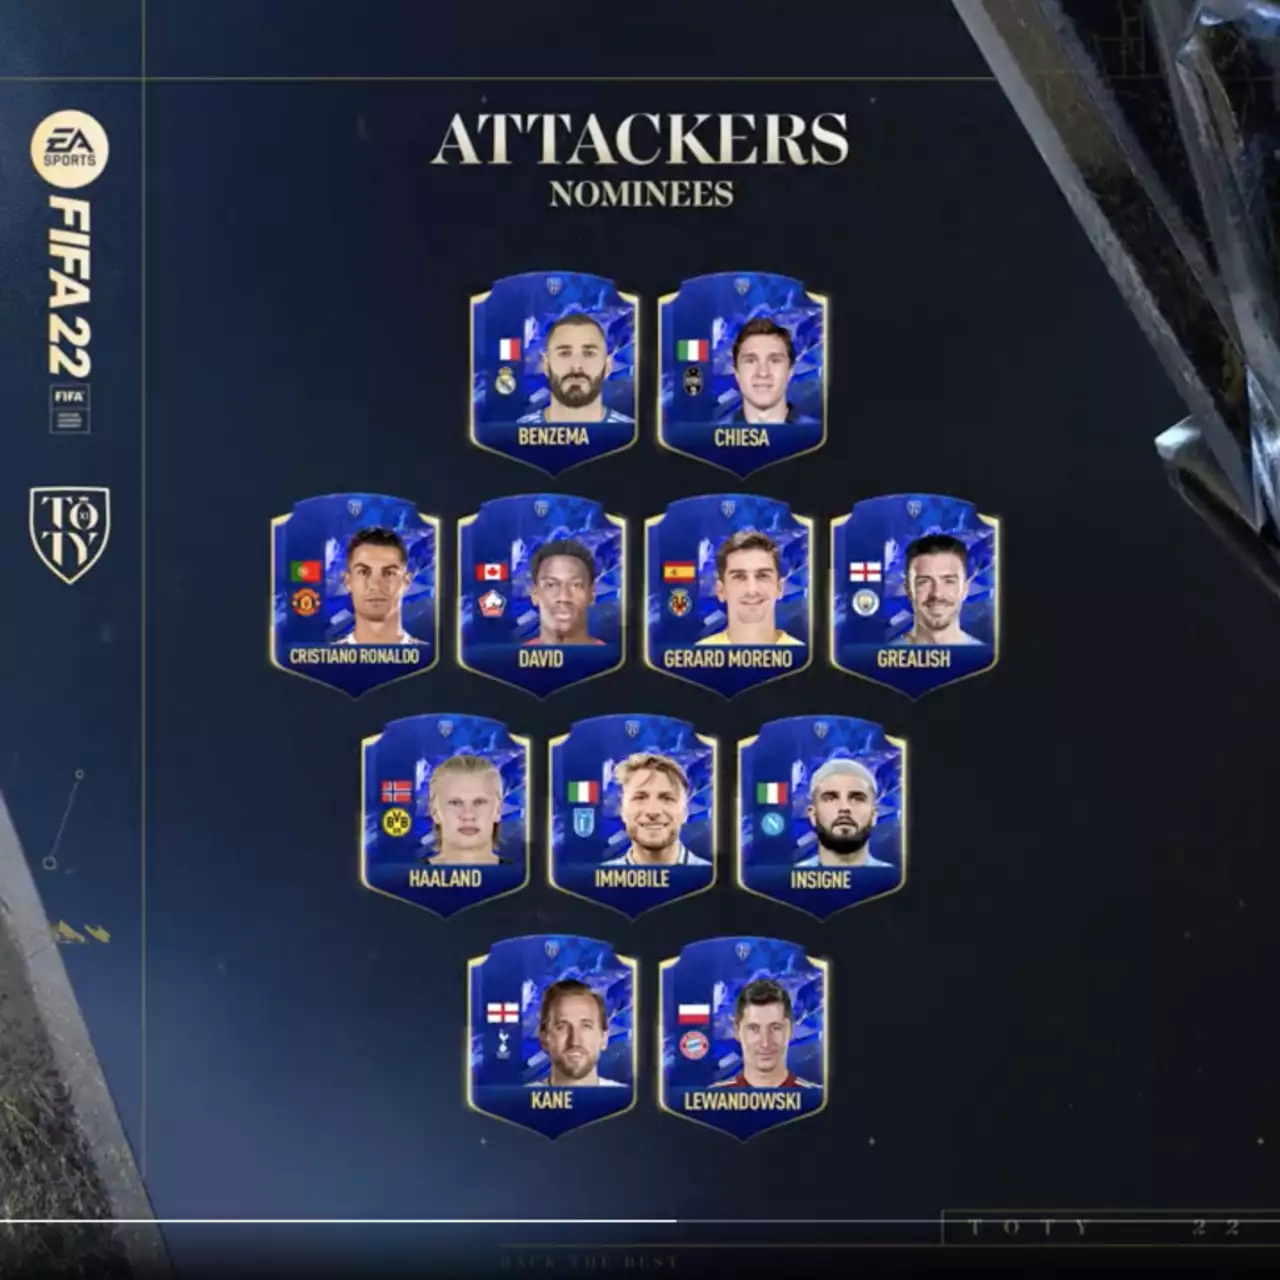 Billy Reconcile easy to be hurt FIFA 22 TOTY Attackers Nominees ft. Ronaldo, Kane, Messi, more | GINX  Esports TV